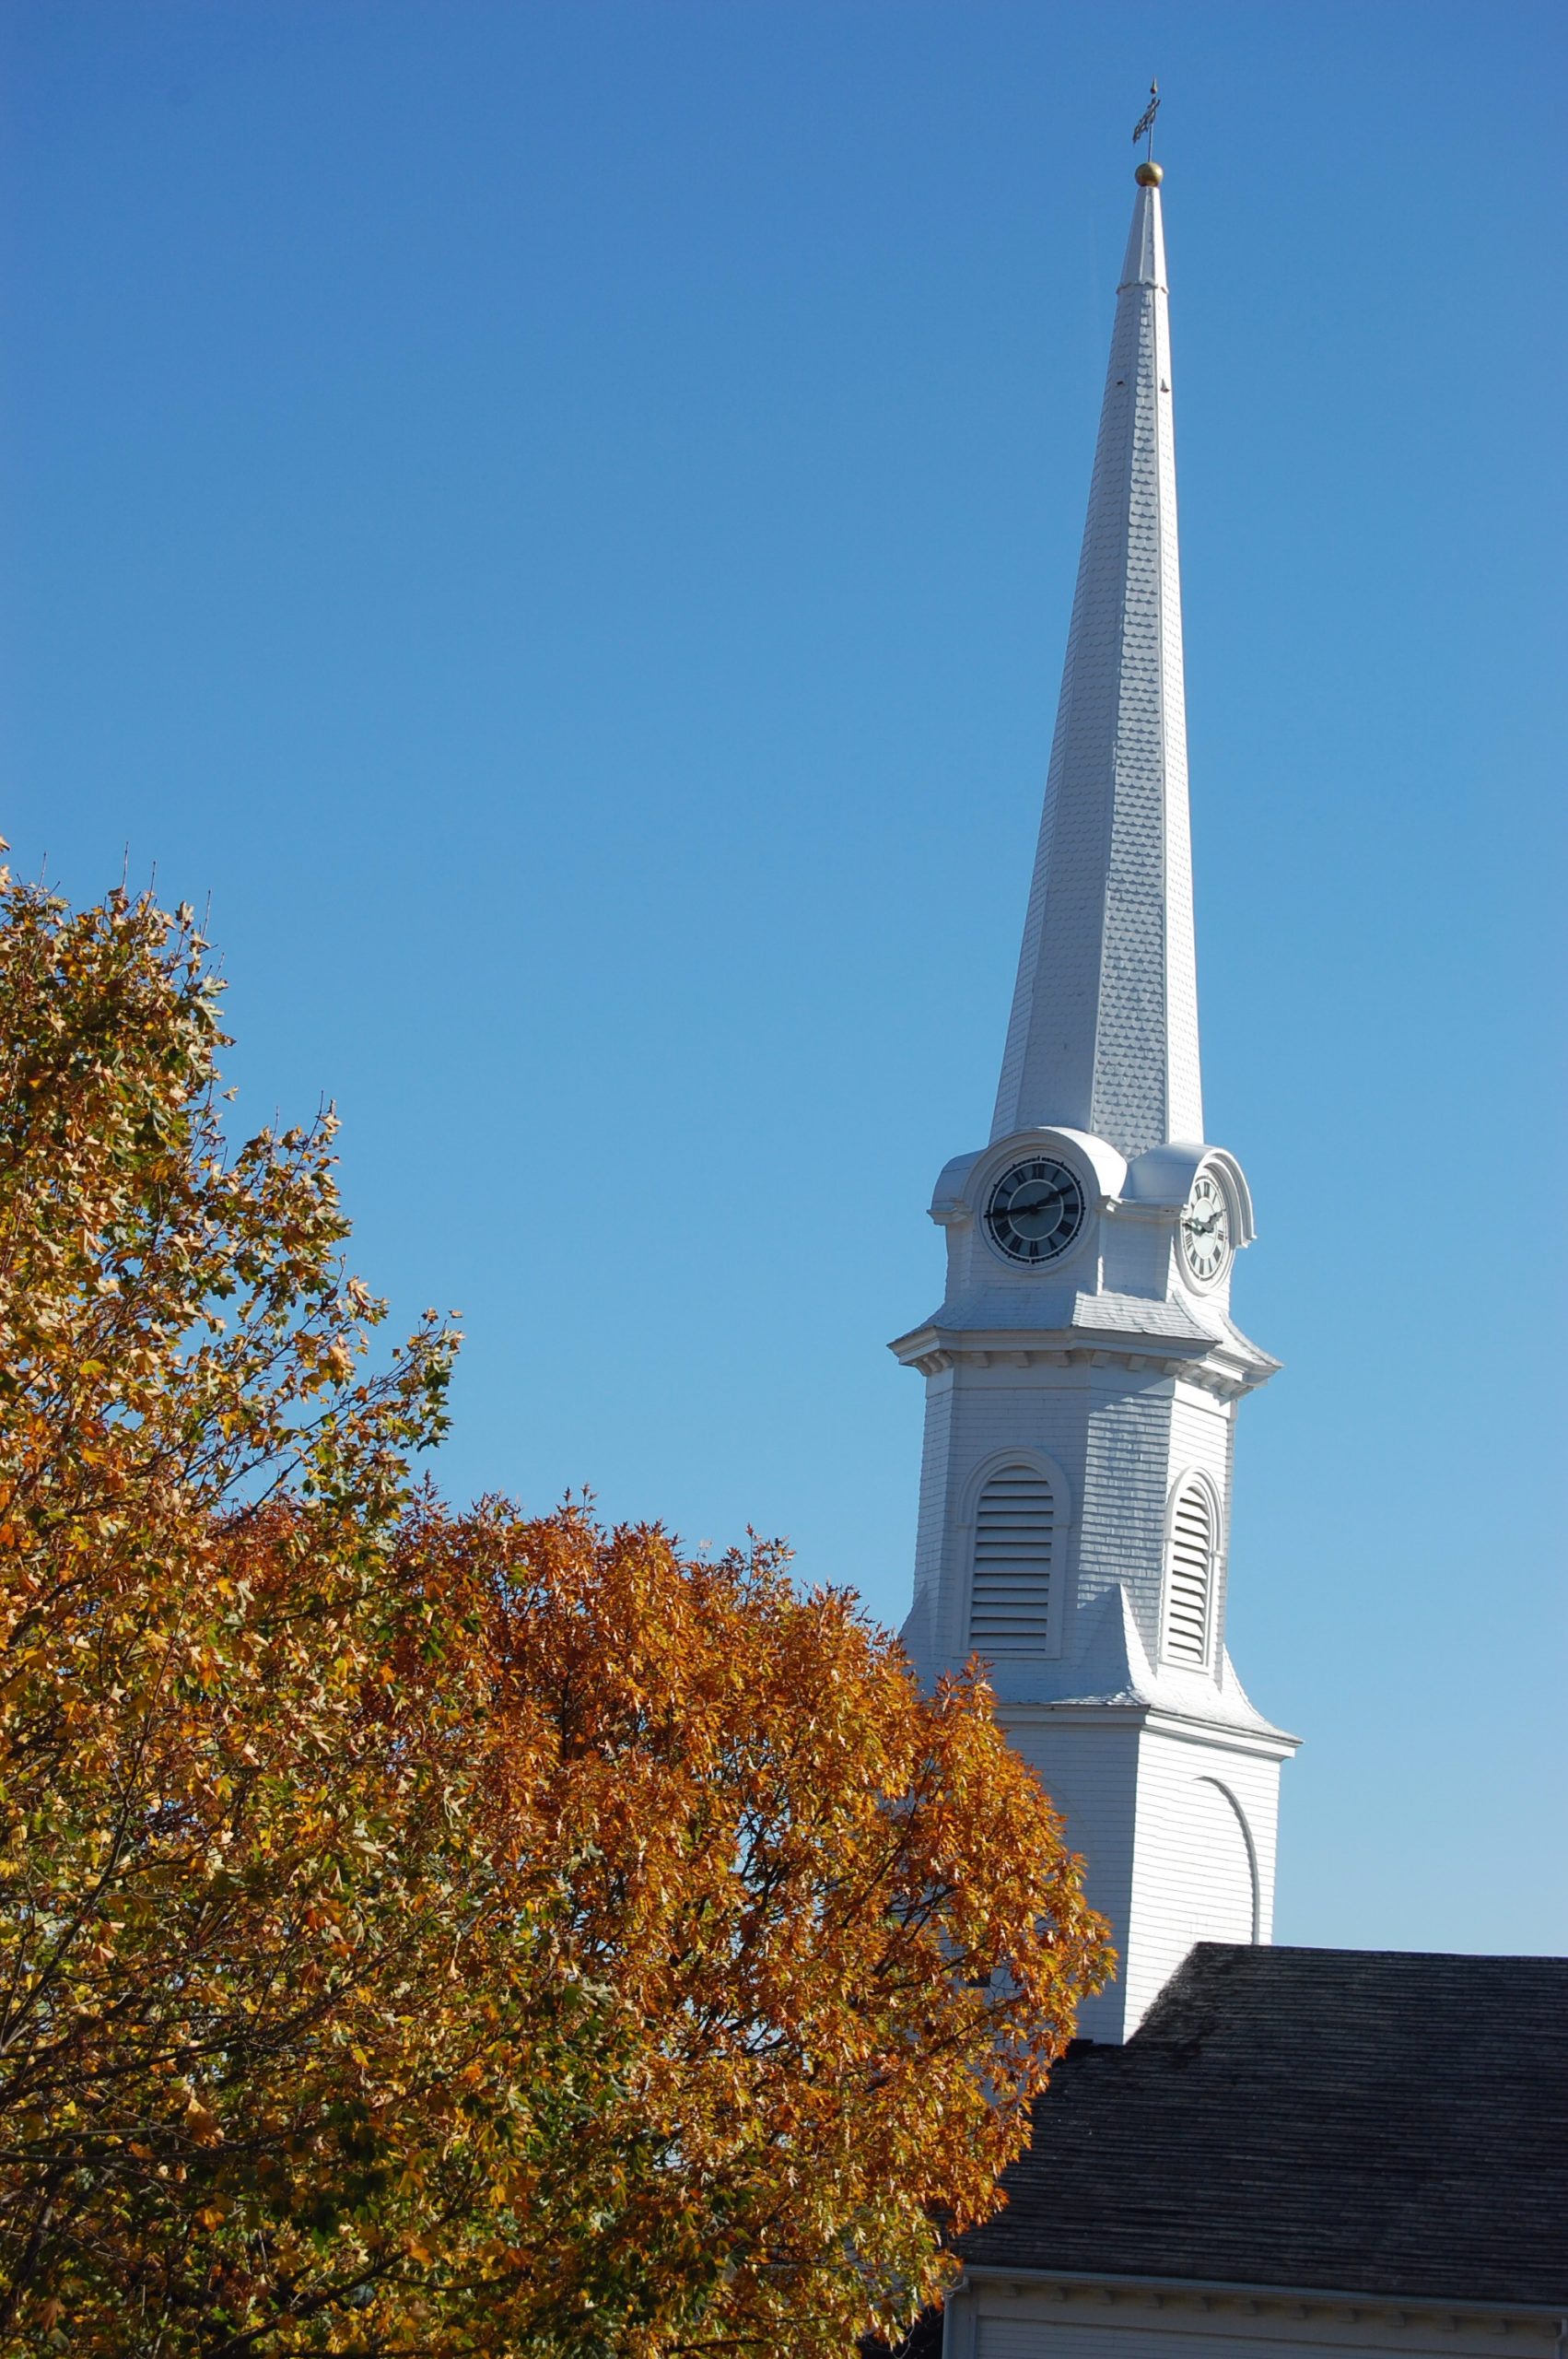 Chestnut Street Baptist Church Steeple (user submitted)